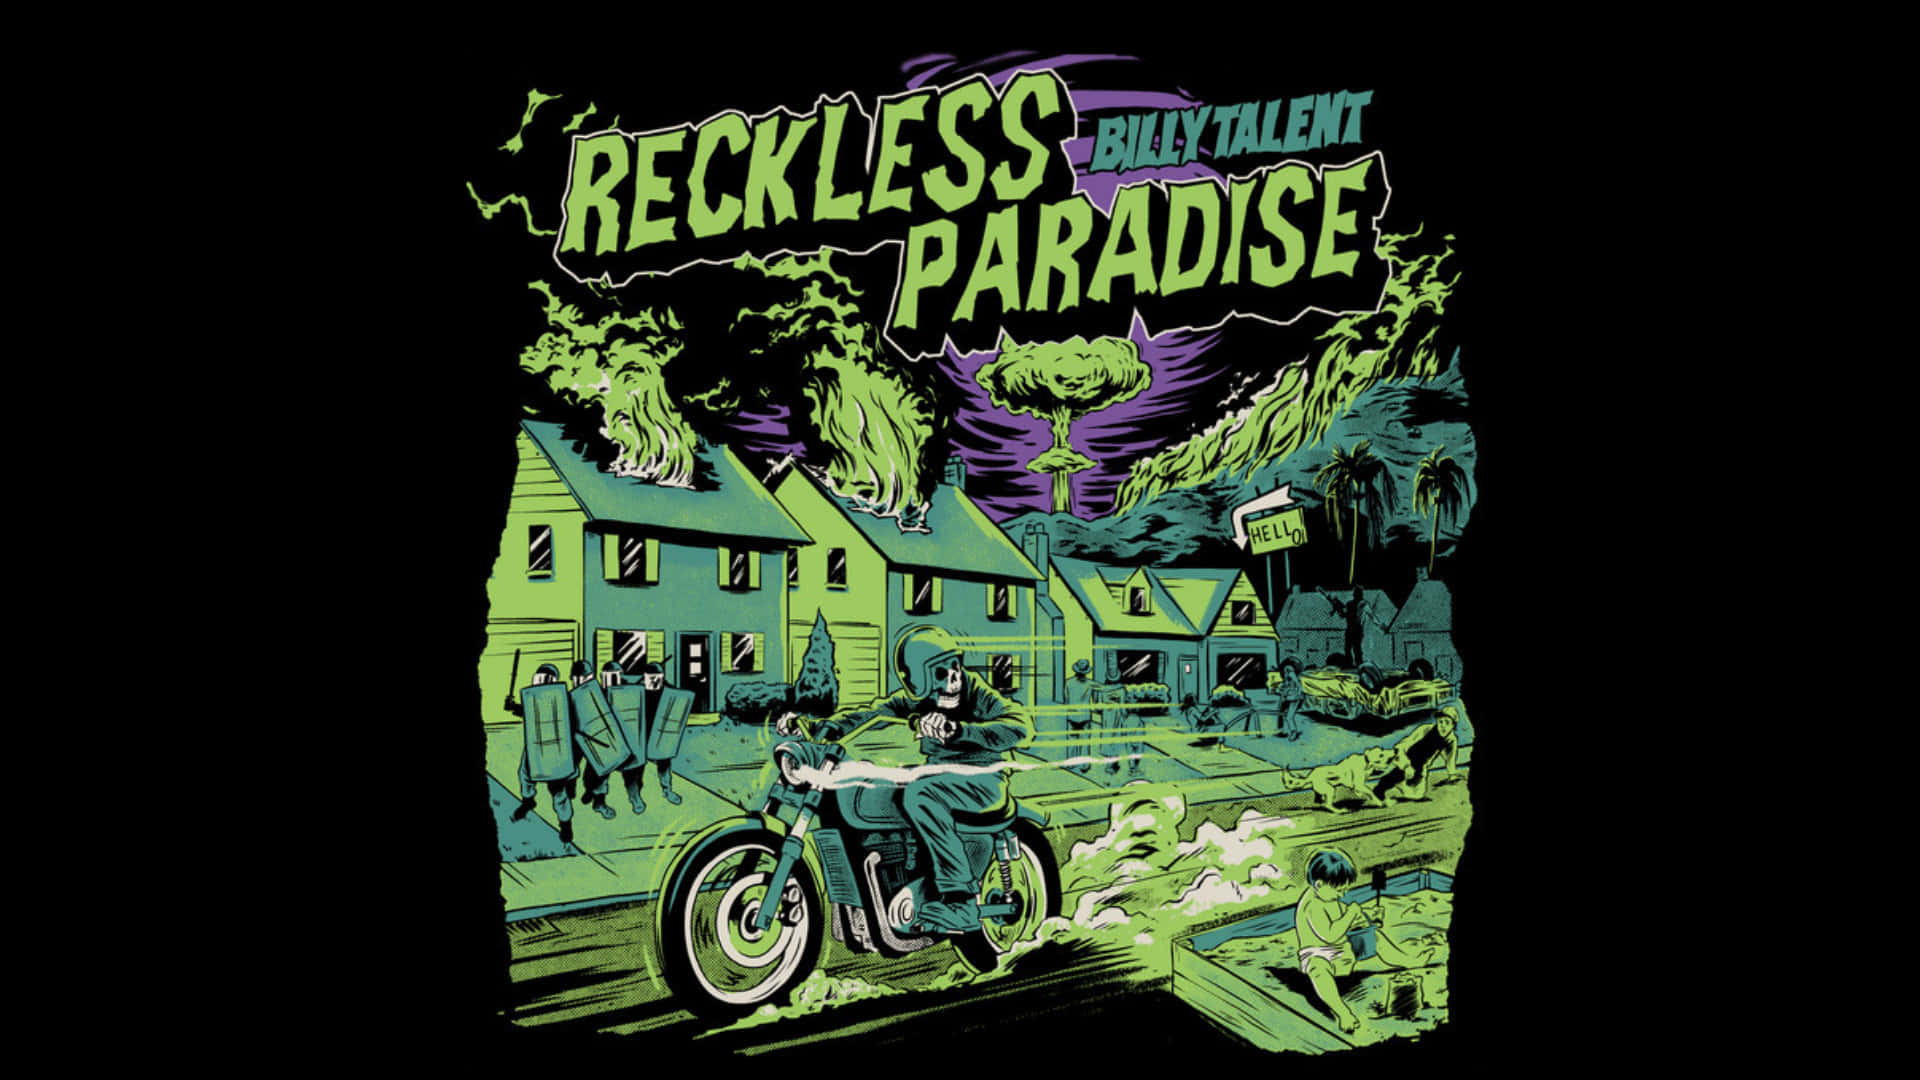 Reckless Paradise By Billy Talent Wallpaper